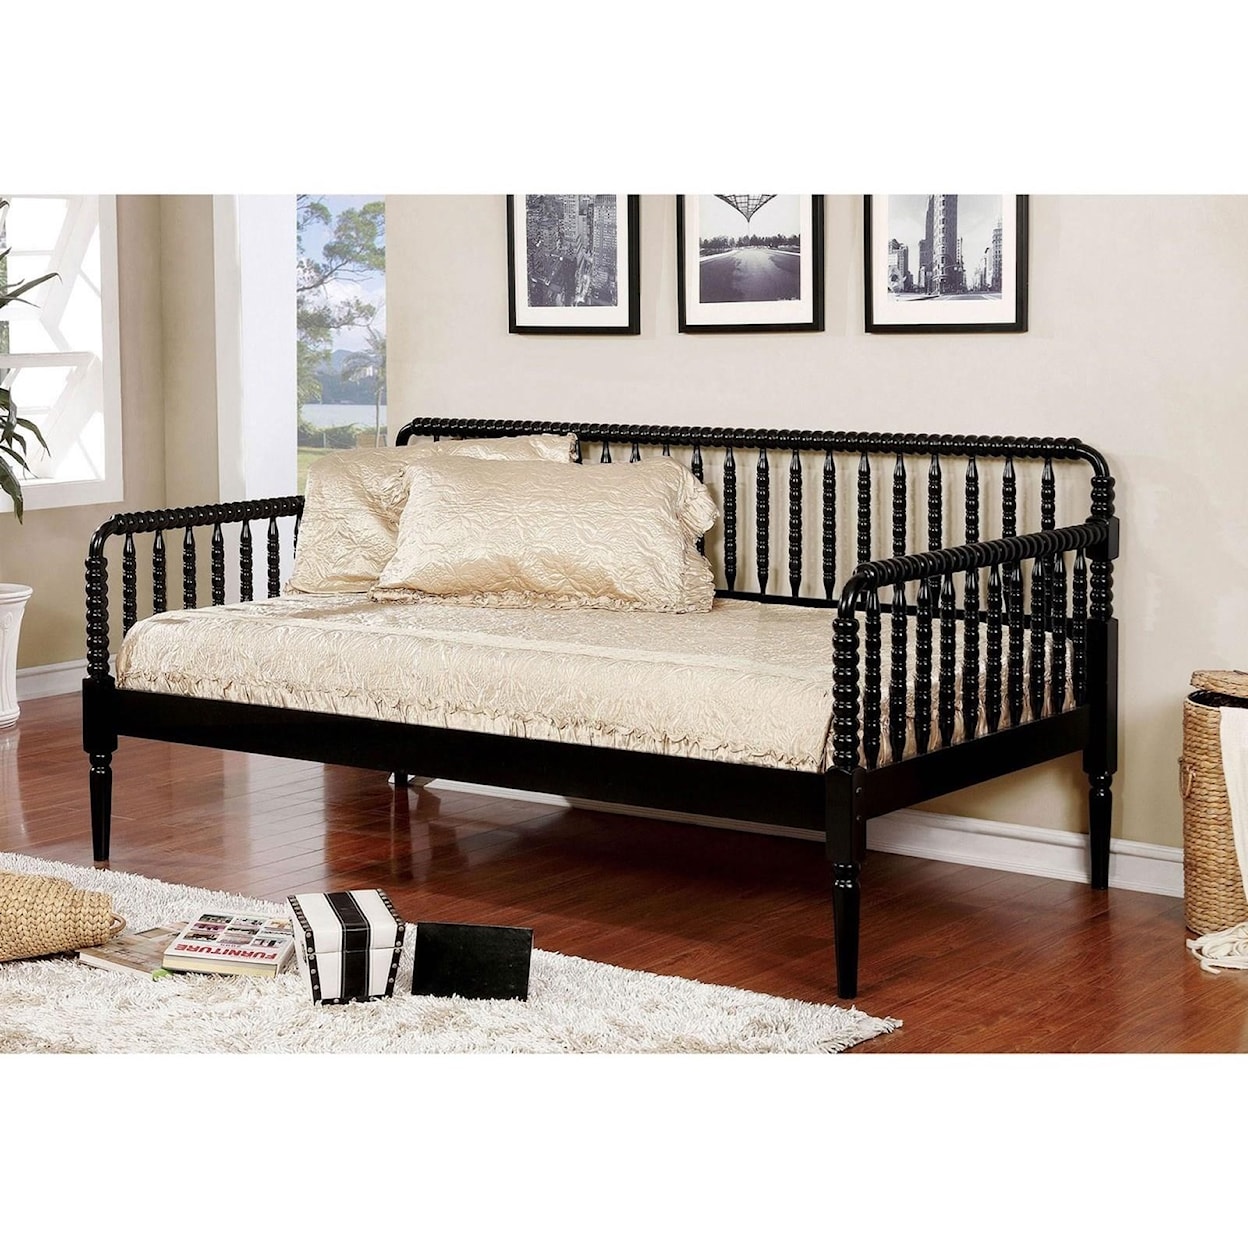 FUSA Linda Twin Daybed